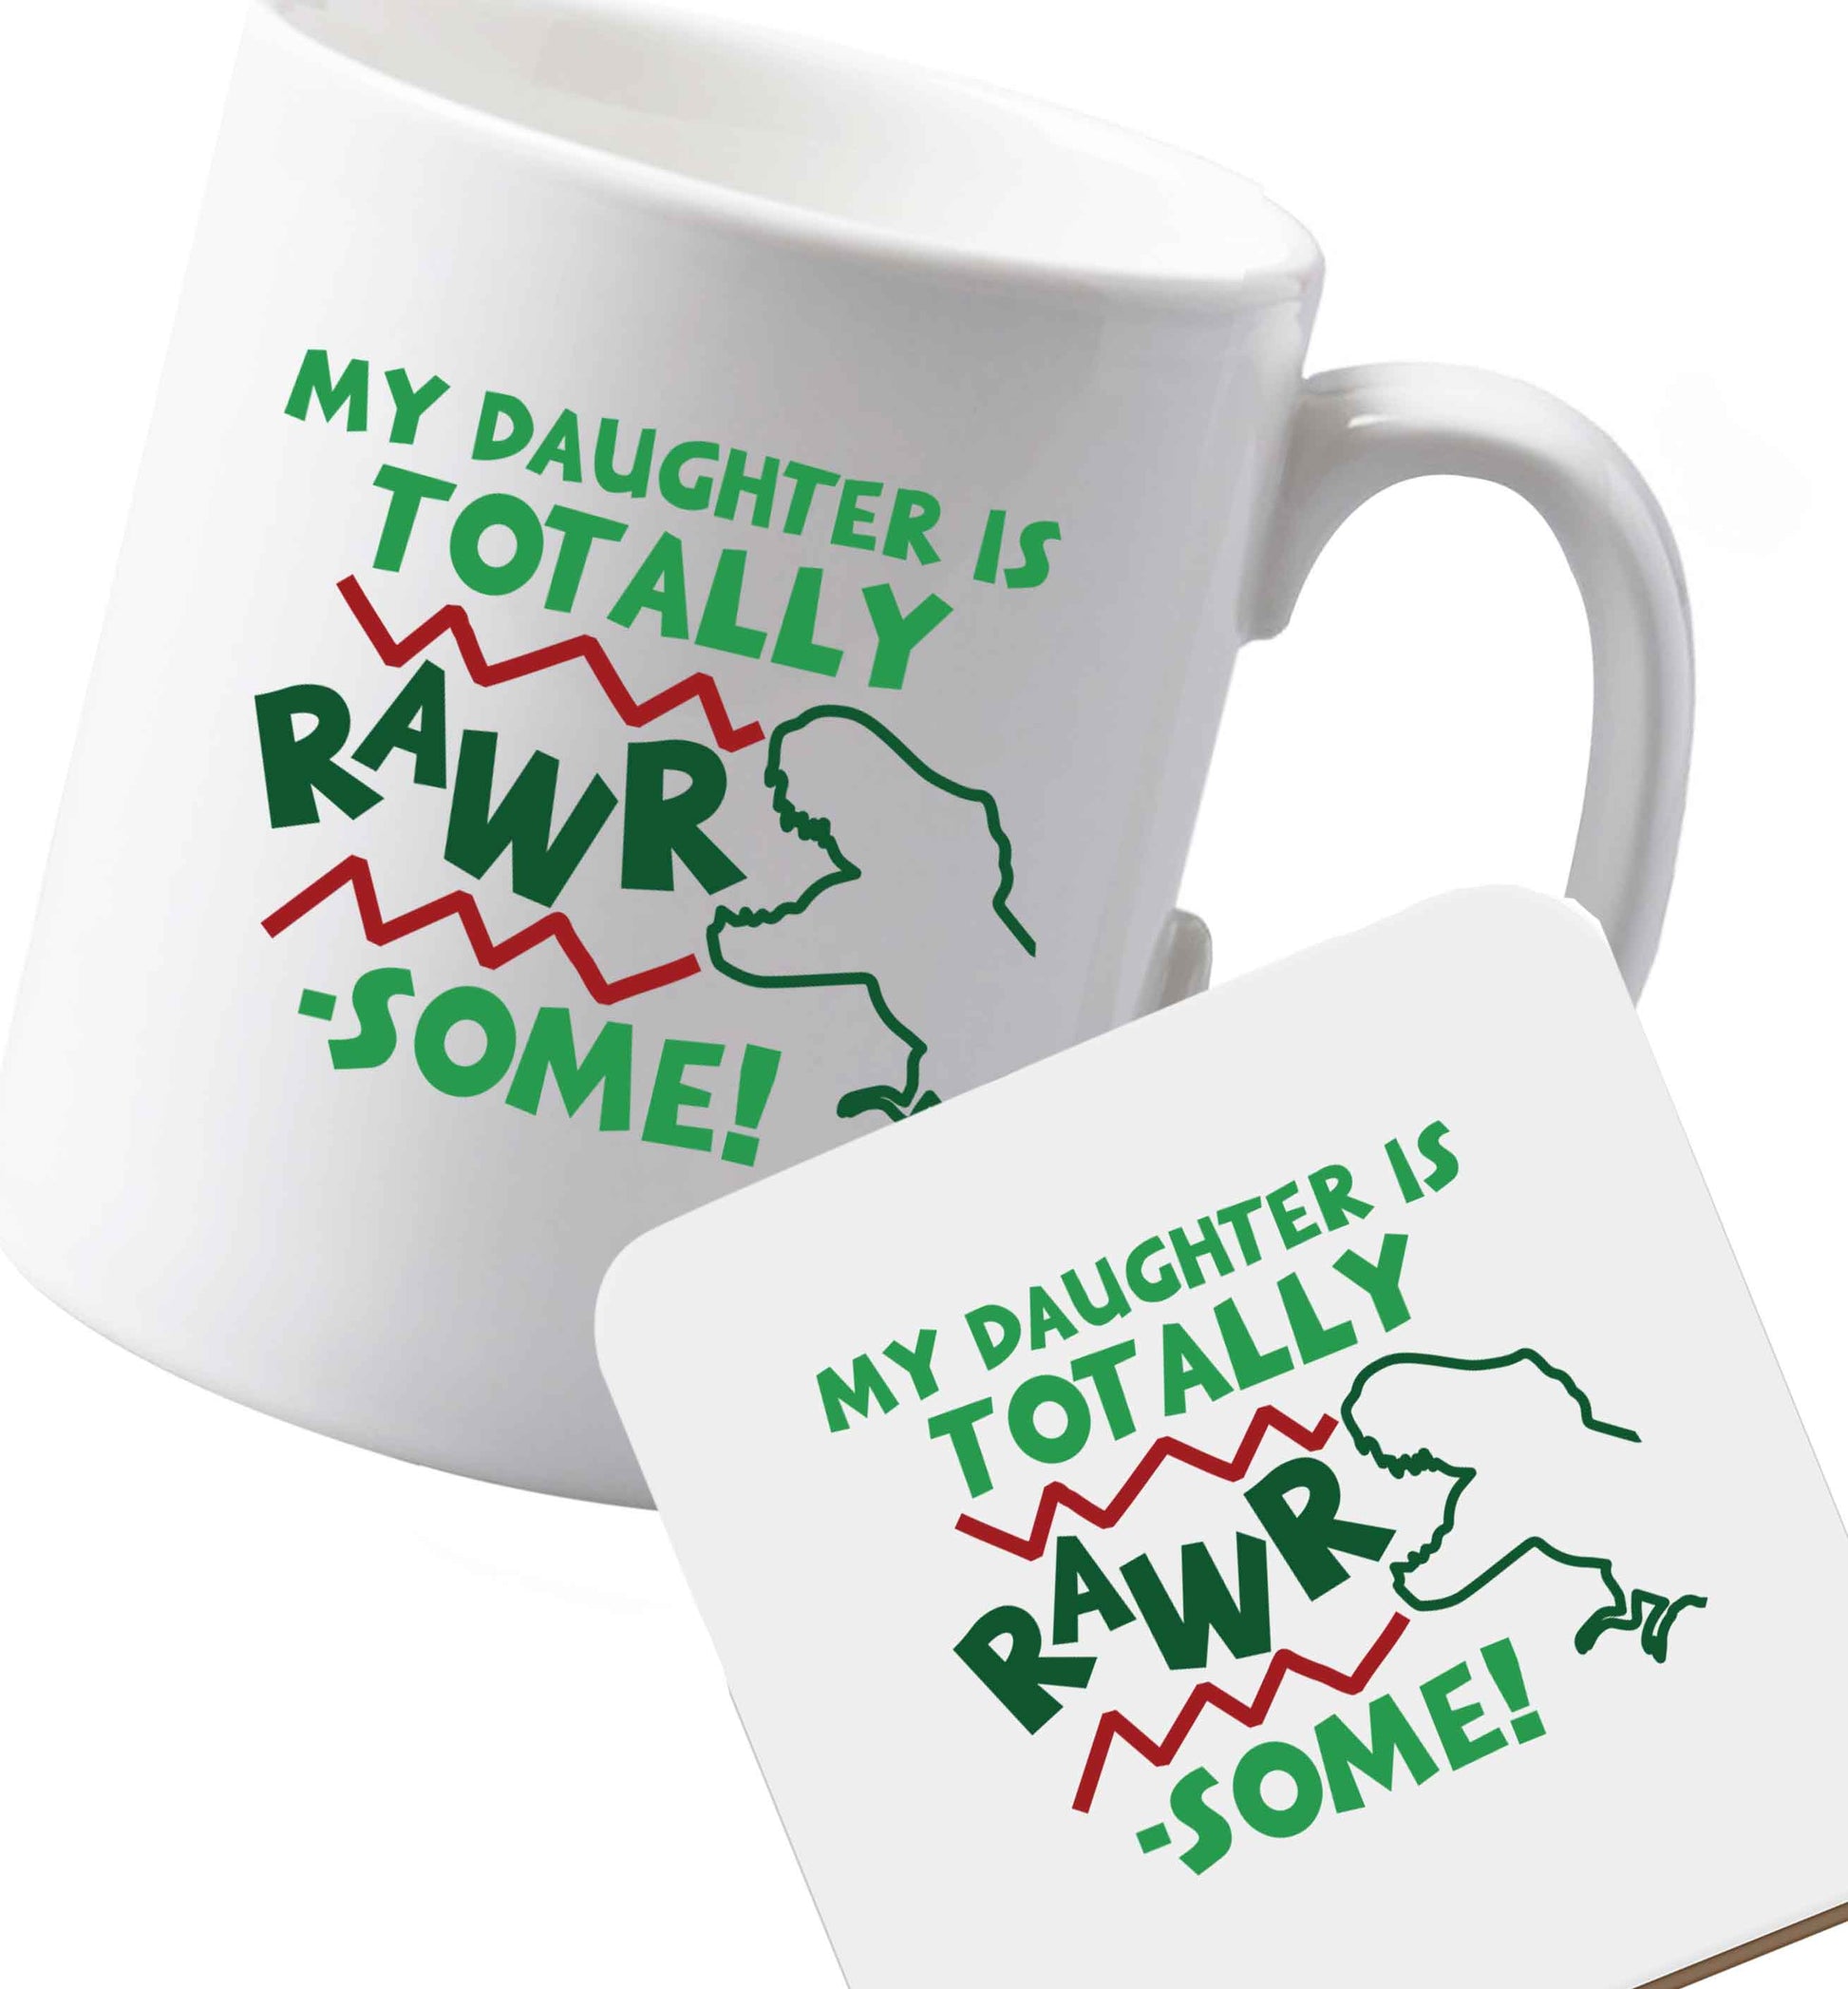 10 oz Ceramic mug and coaster My daughter is totally rawrsome both sides